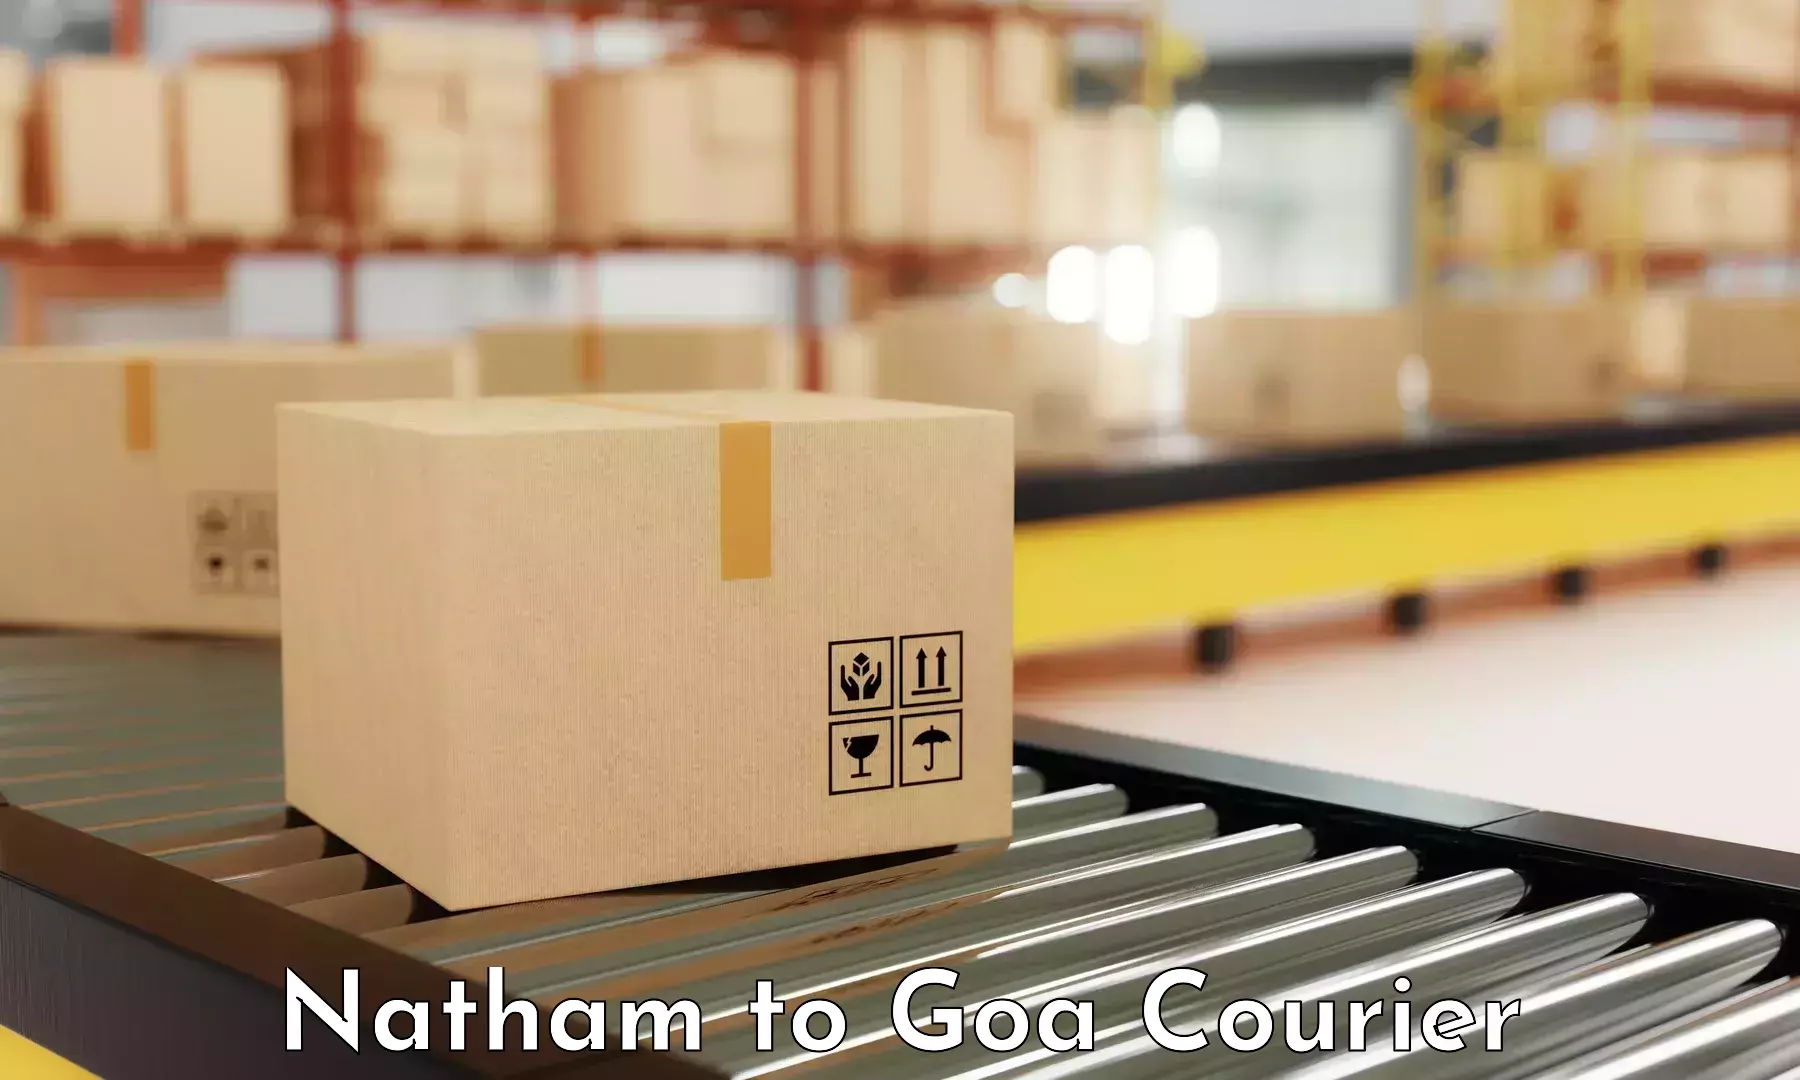 International courier networks Natham to South Goa